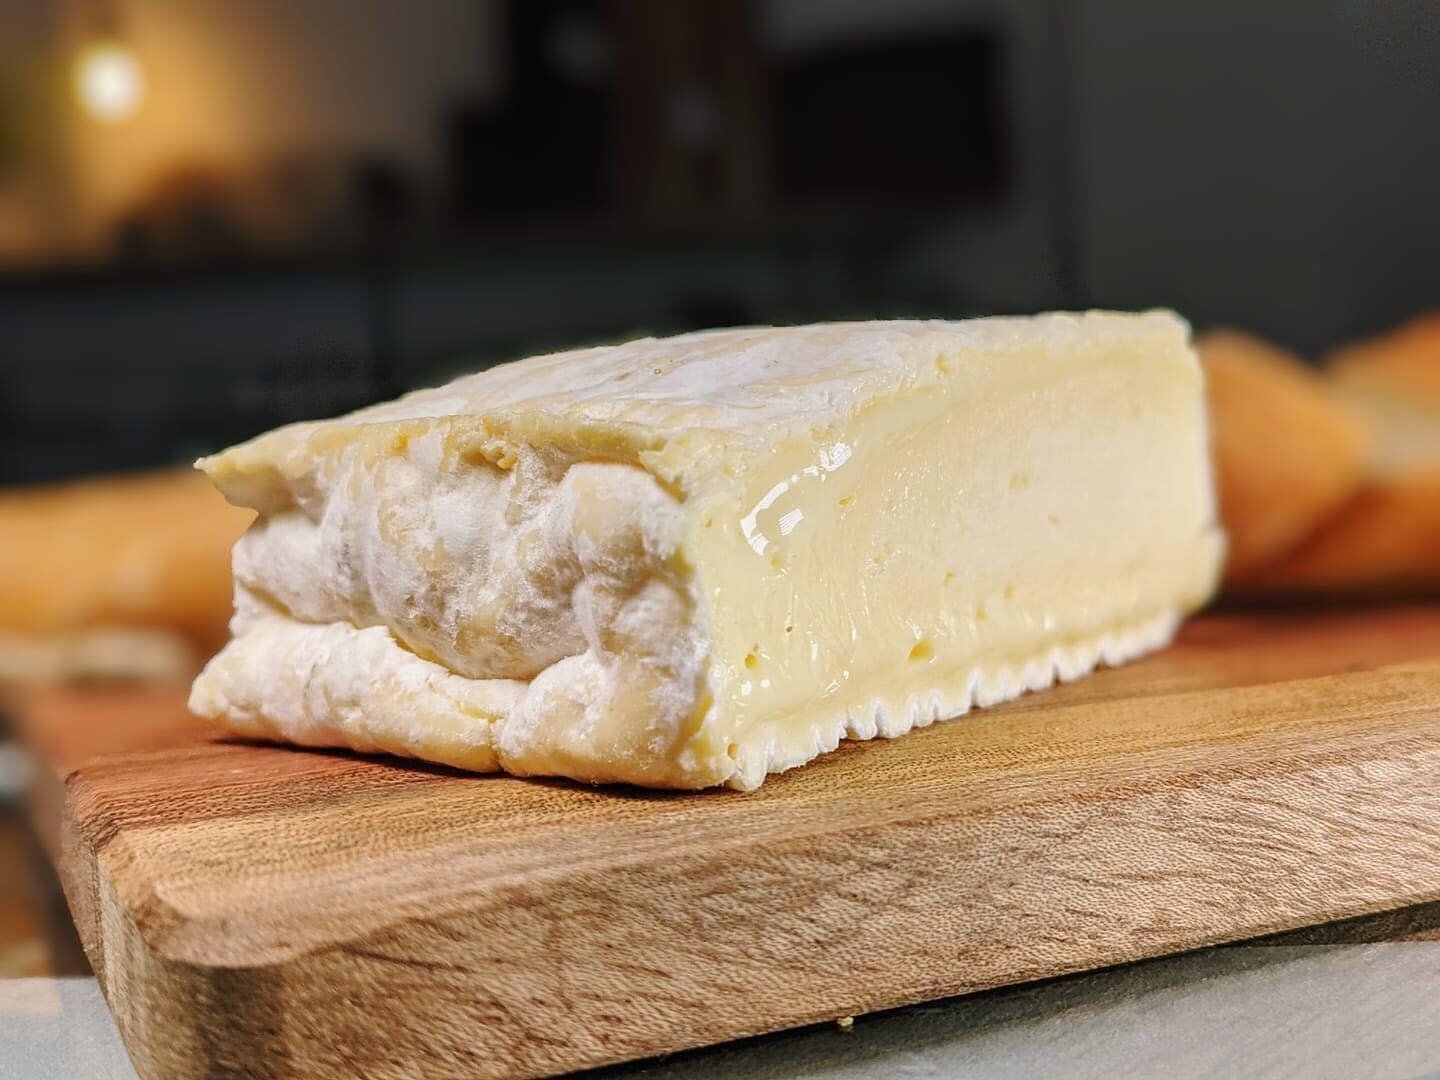 @hallsfamilydairy have been dairy farming for over 100 years 🐄🥛They have the only pure-bred herd of Normande Cows in Australia, which is one of the reasons Halls Suzette is a winner! 😍

This local washed rind cheese has an irresistibly smooth, a c